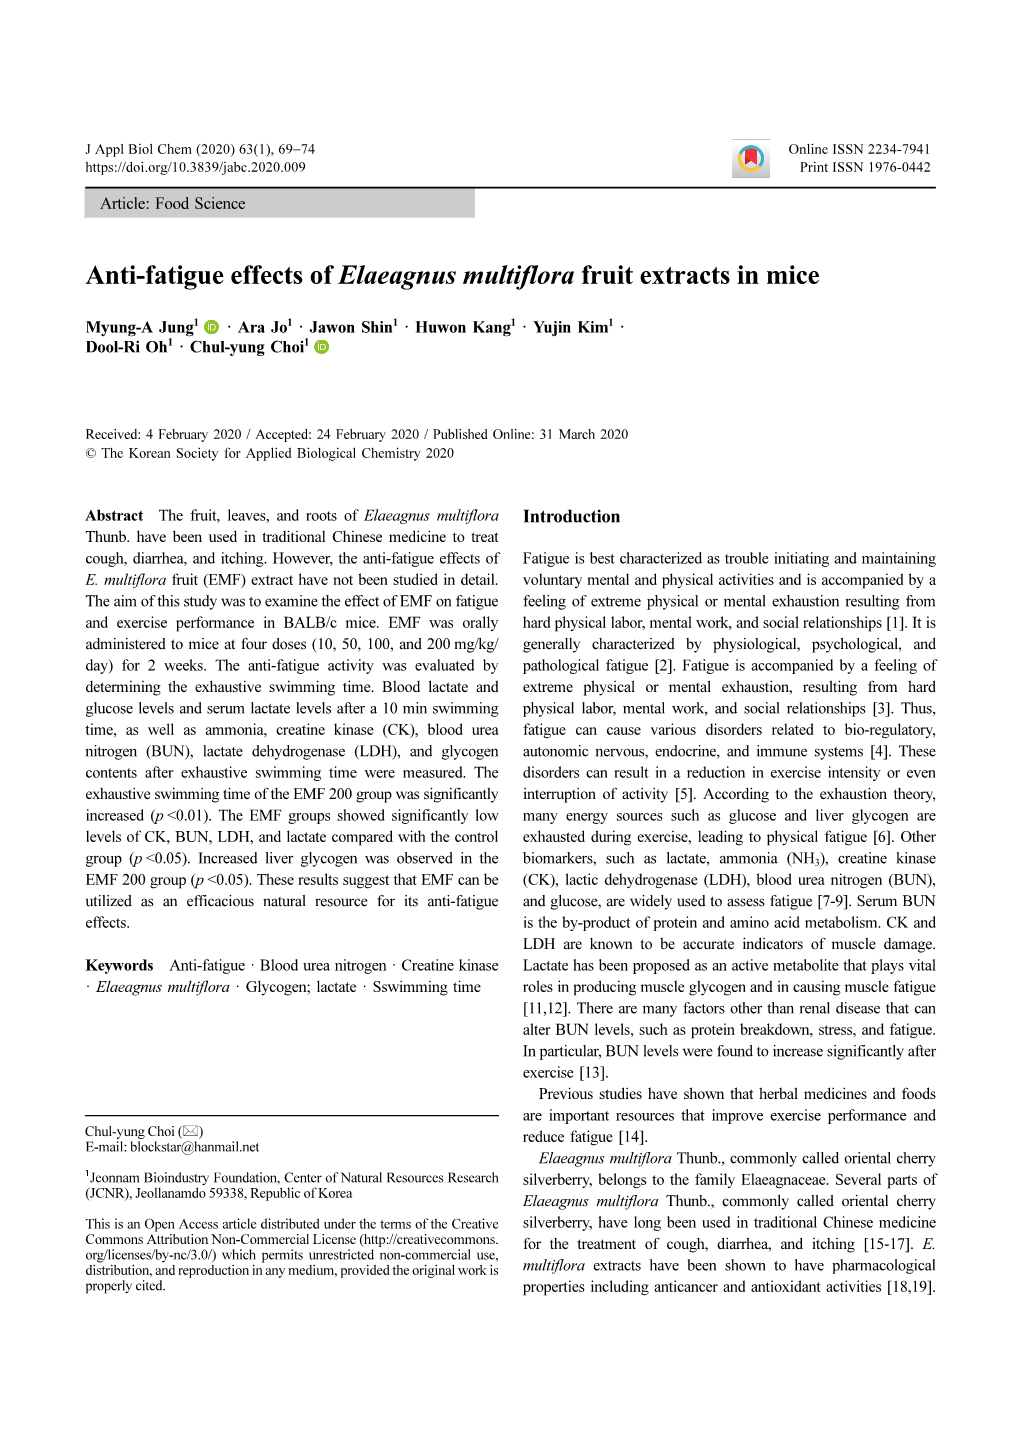 Anti-Fatigue Effects of Elaeagnus Multiflora Fruit Extracts in Mice